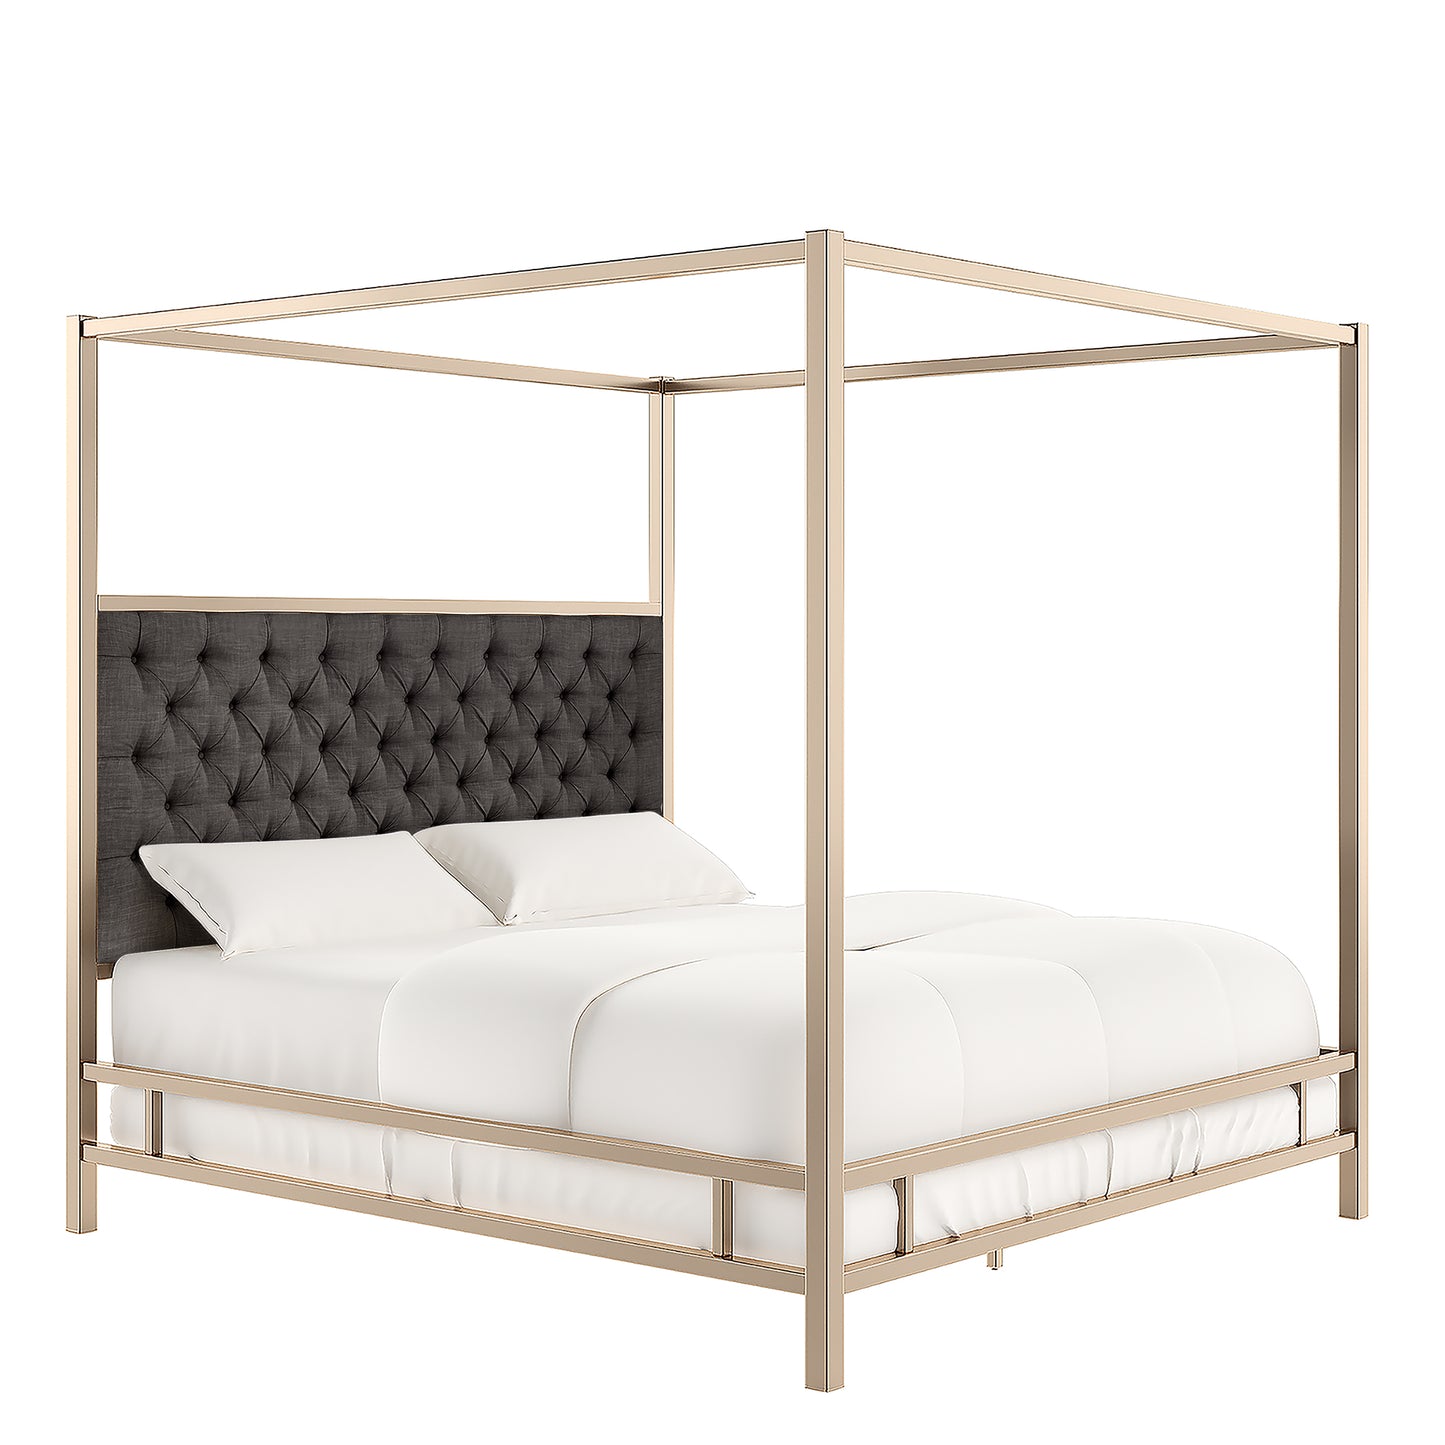 Metal Canopy Bed with Upholstered Headboard - Dark Grey Linen, Champagne Gold Finish, King Size